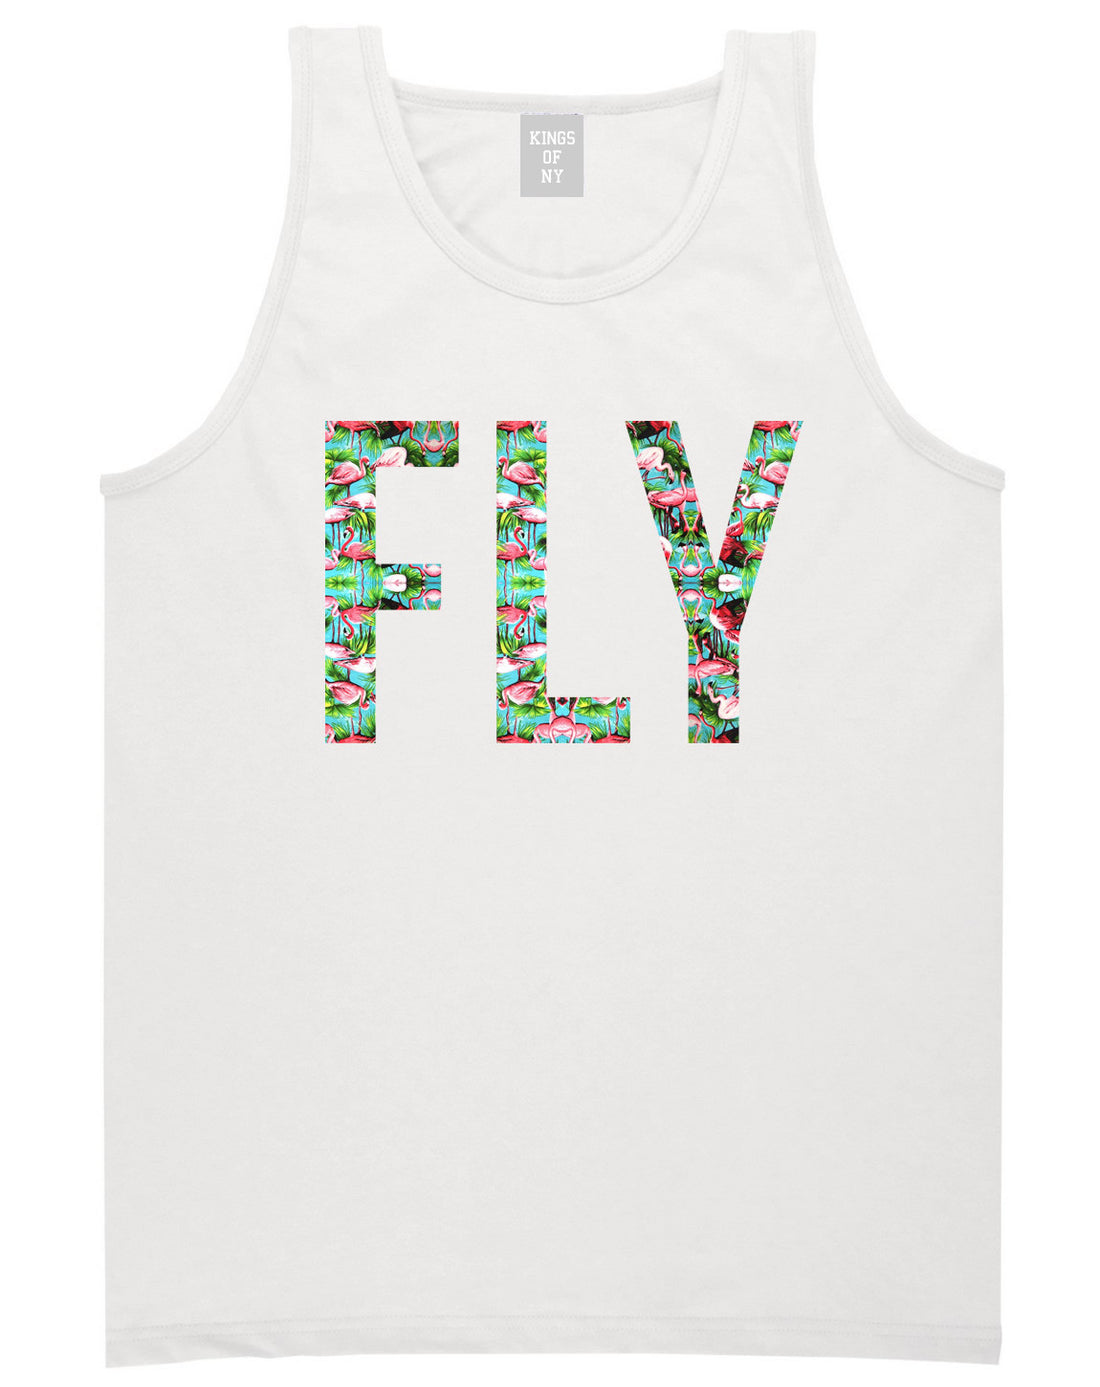 FLY Flamingo Print Summer Wild Society Tank Top In White by Kings Of NY